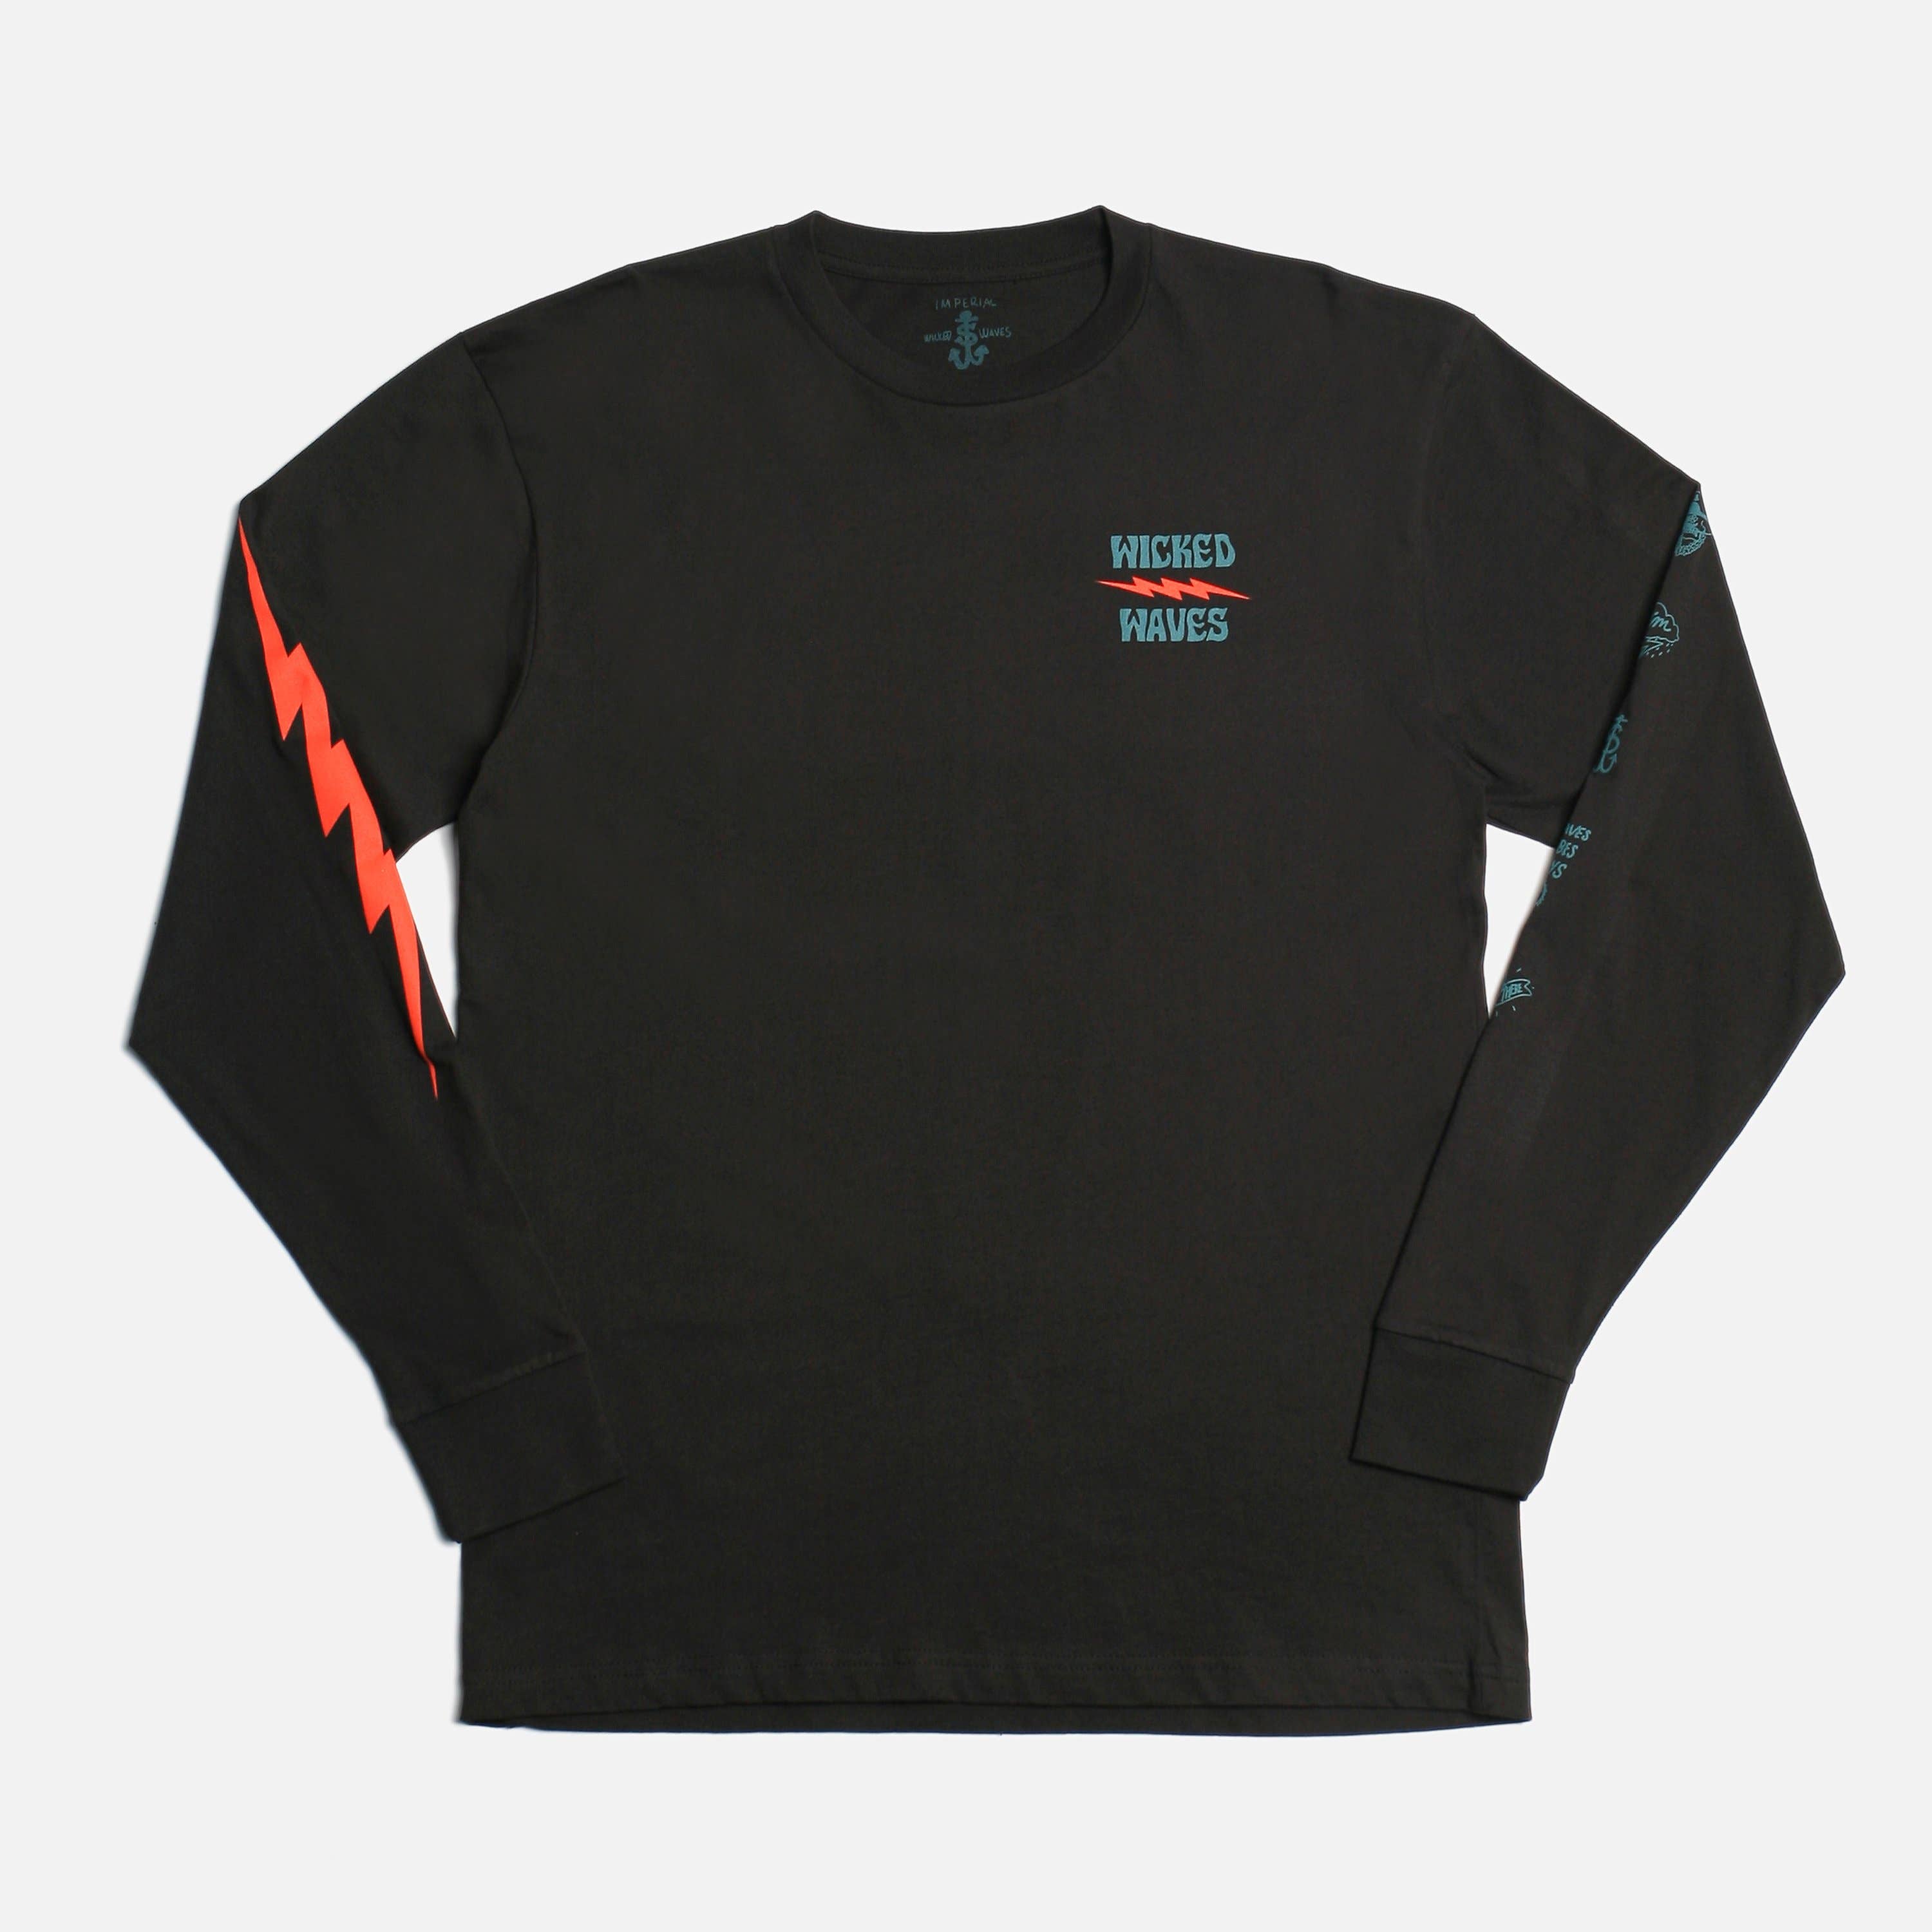 Wicked Waves LS T-Shirt - Black (7842069381347)